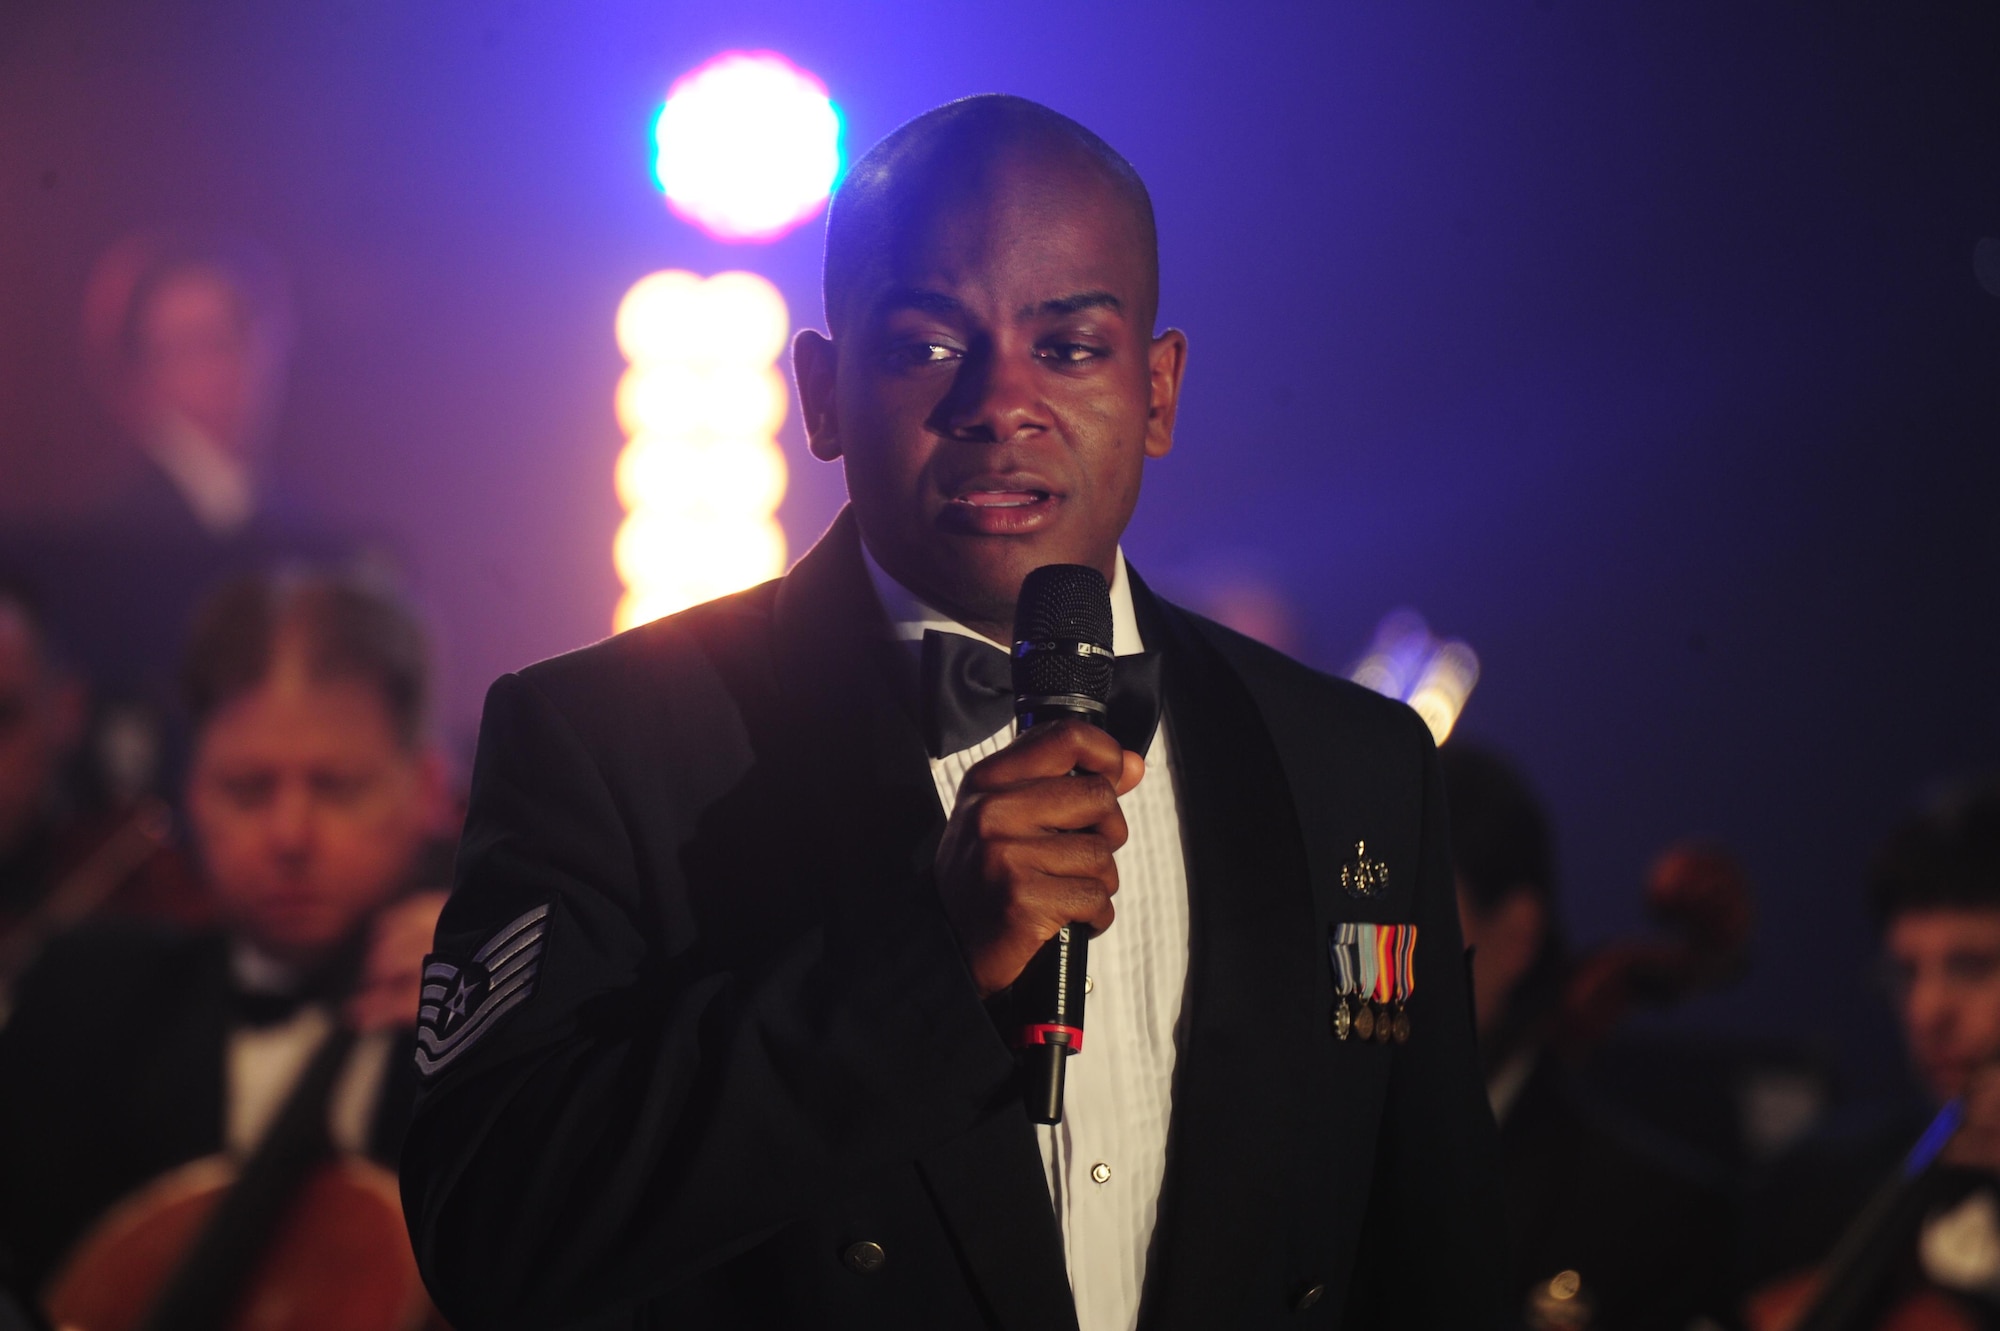 Tech. Sgt. Aaron Paige, a U.S. Air Force Band vocalist, sings a solo performance at the Maryland Public Television studio during a live recording of the band’s Veterans Day tribute compositions in Owings Mills, Md., Nov. 06, 2015. Paige is a member of the Singing Sergeants, a vocal ensemble of the band. (U.S. Air Force photo/Senior Airman Joshua R. M. Dewberry)